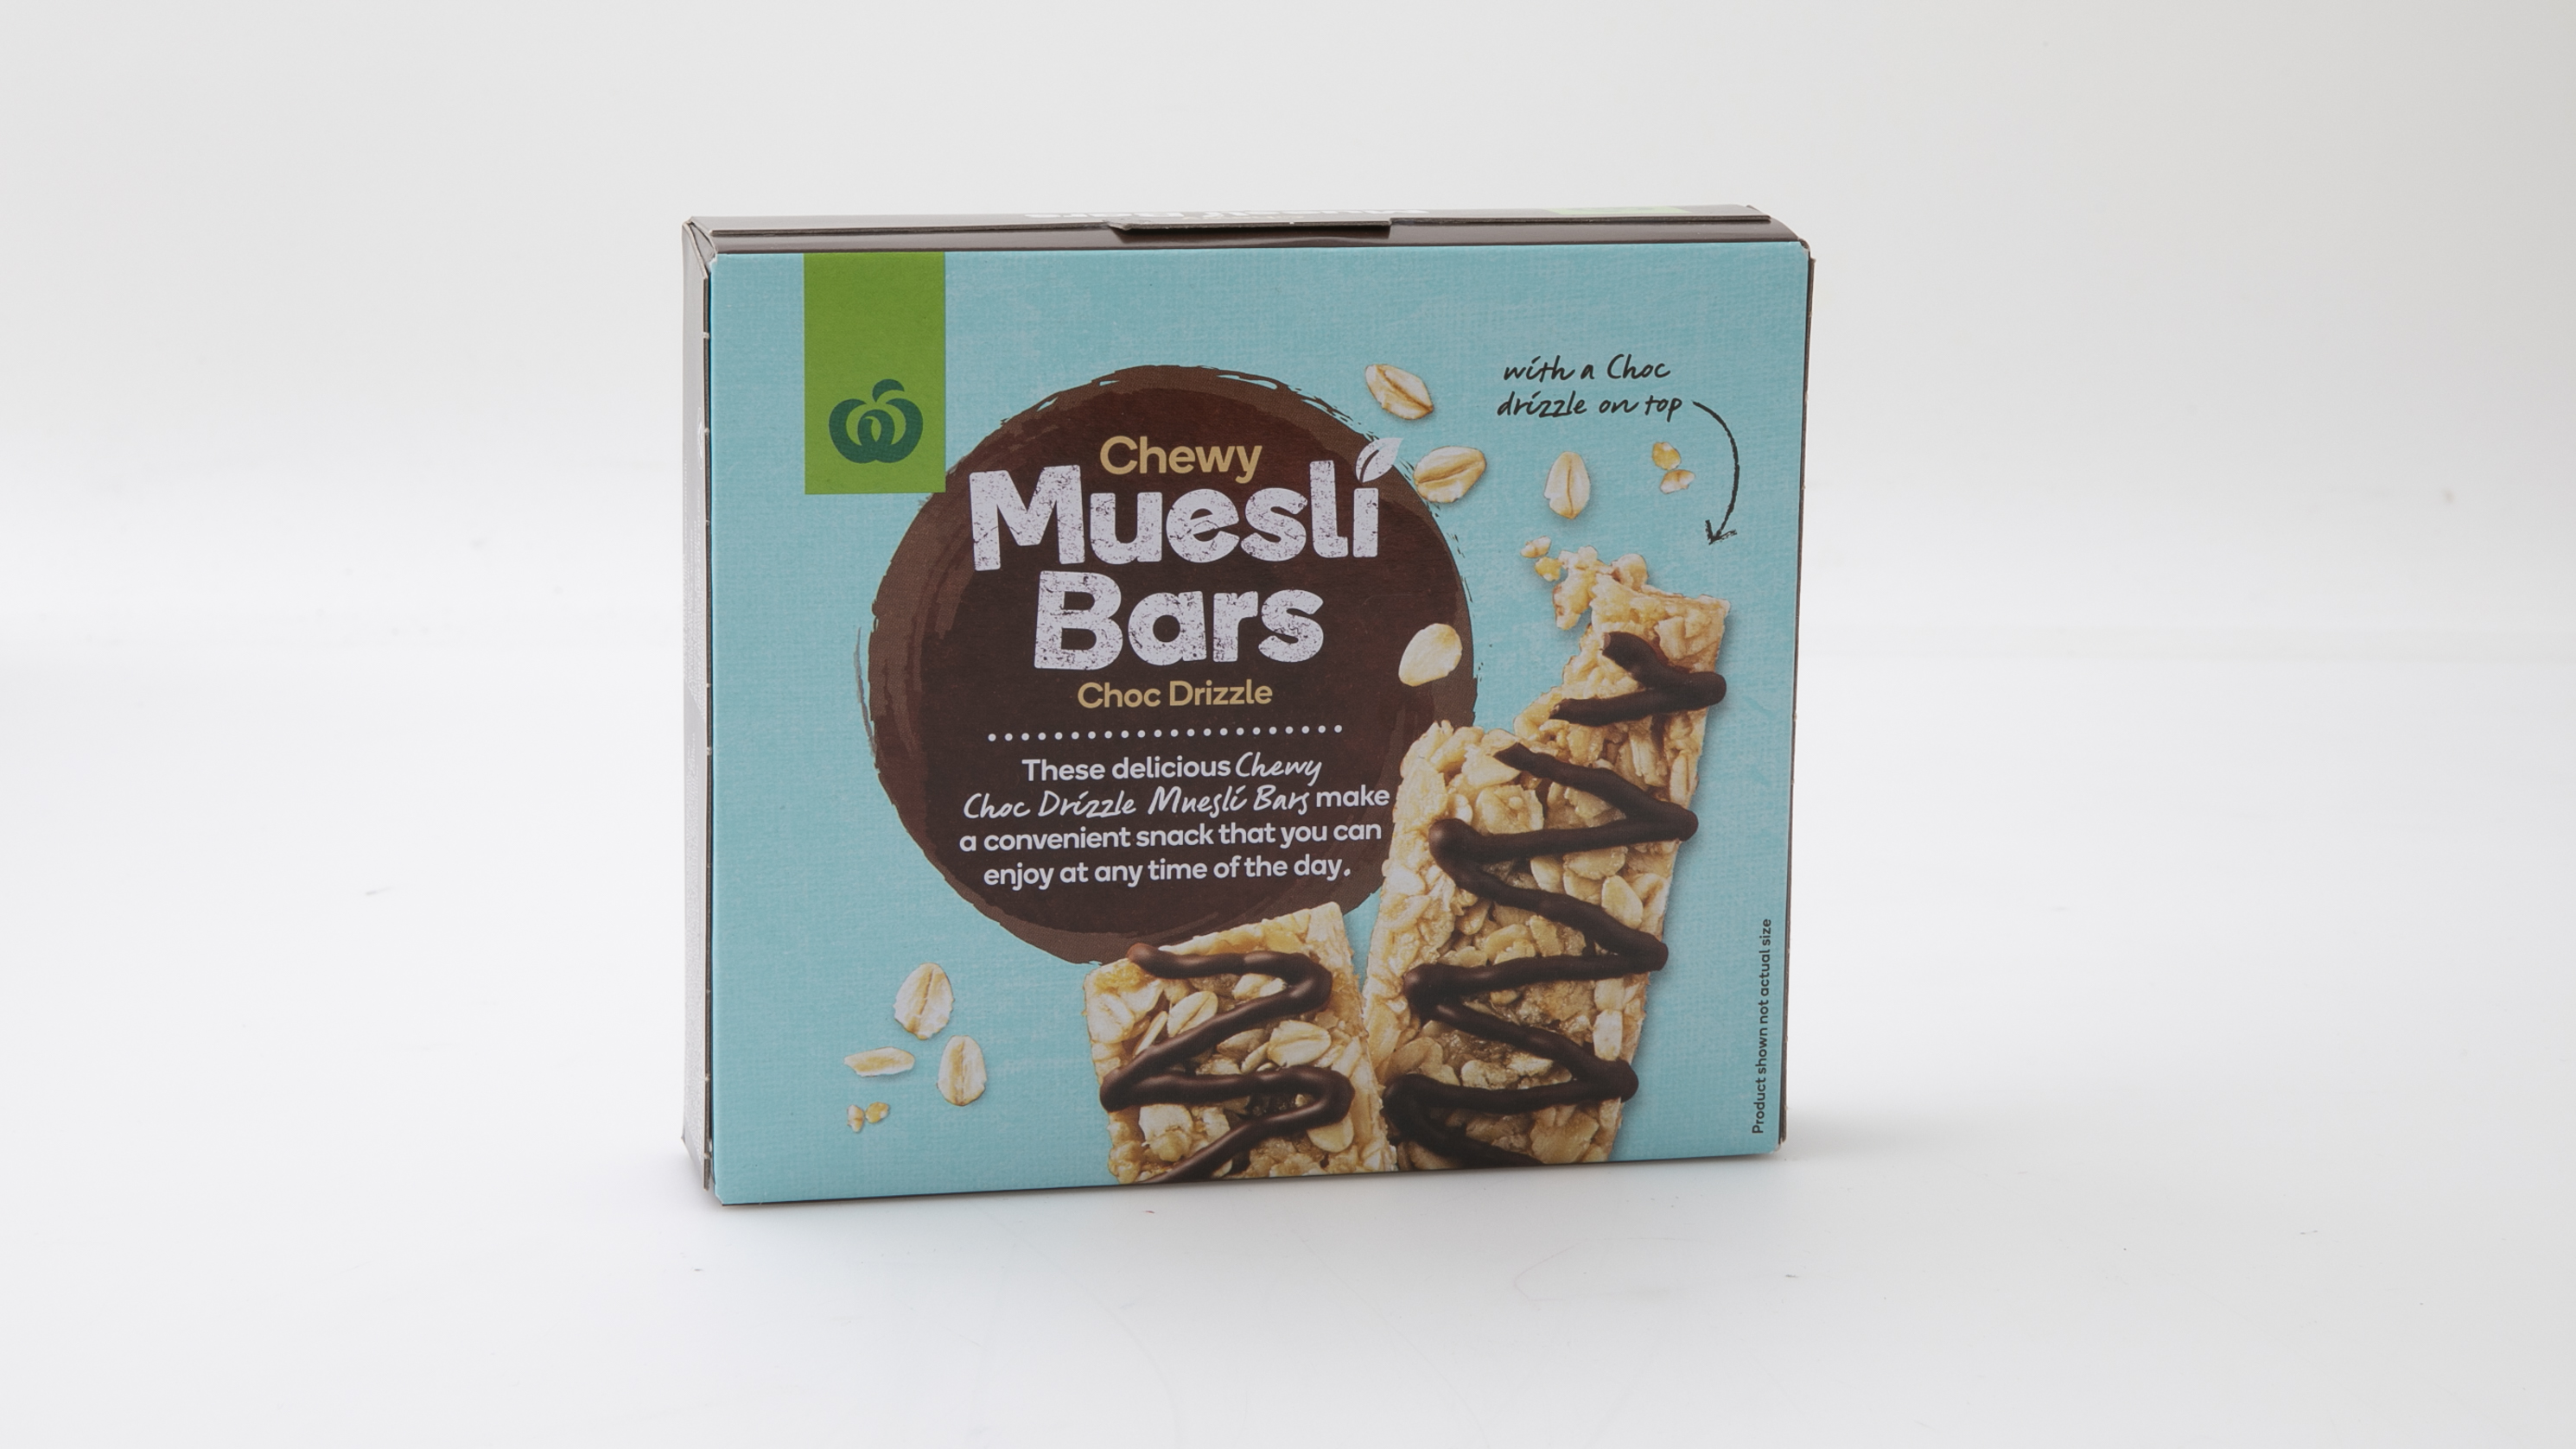 Woolworths Chewy Muesli Bars Choc Drizzle carousel image